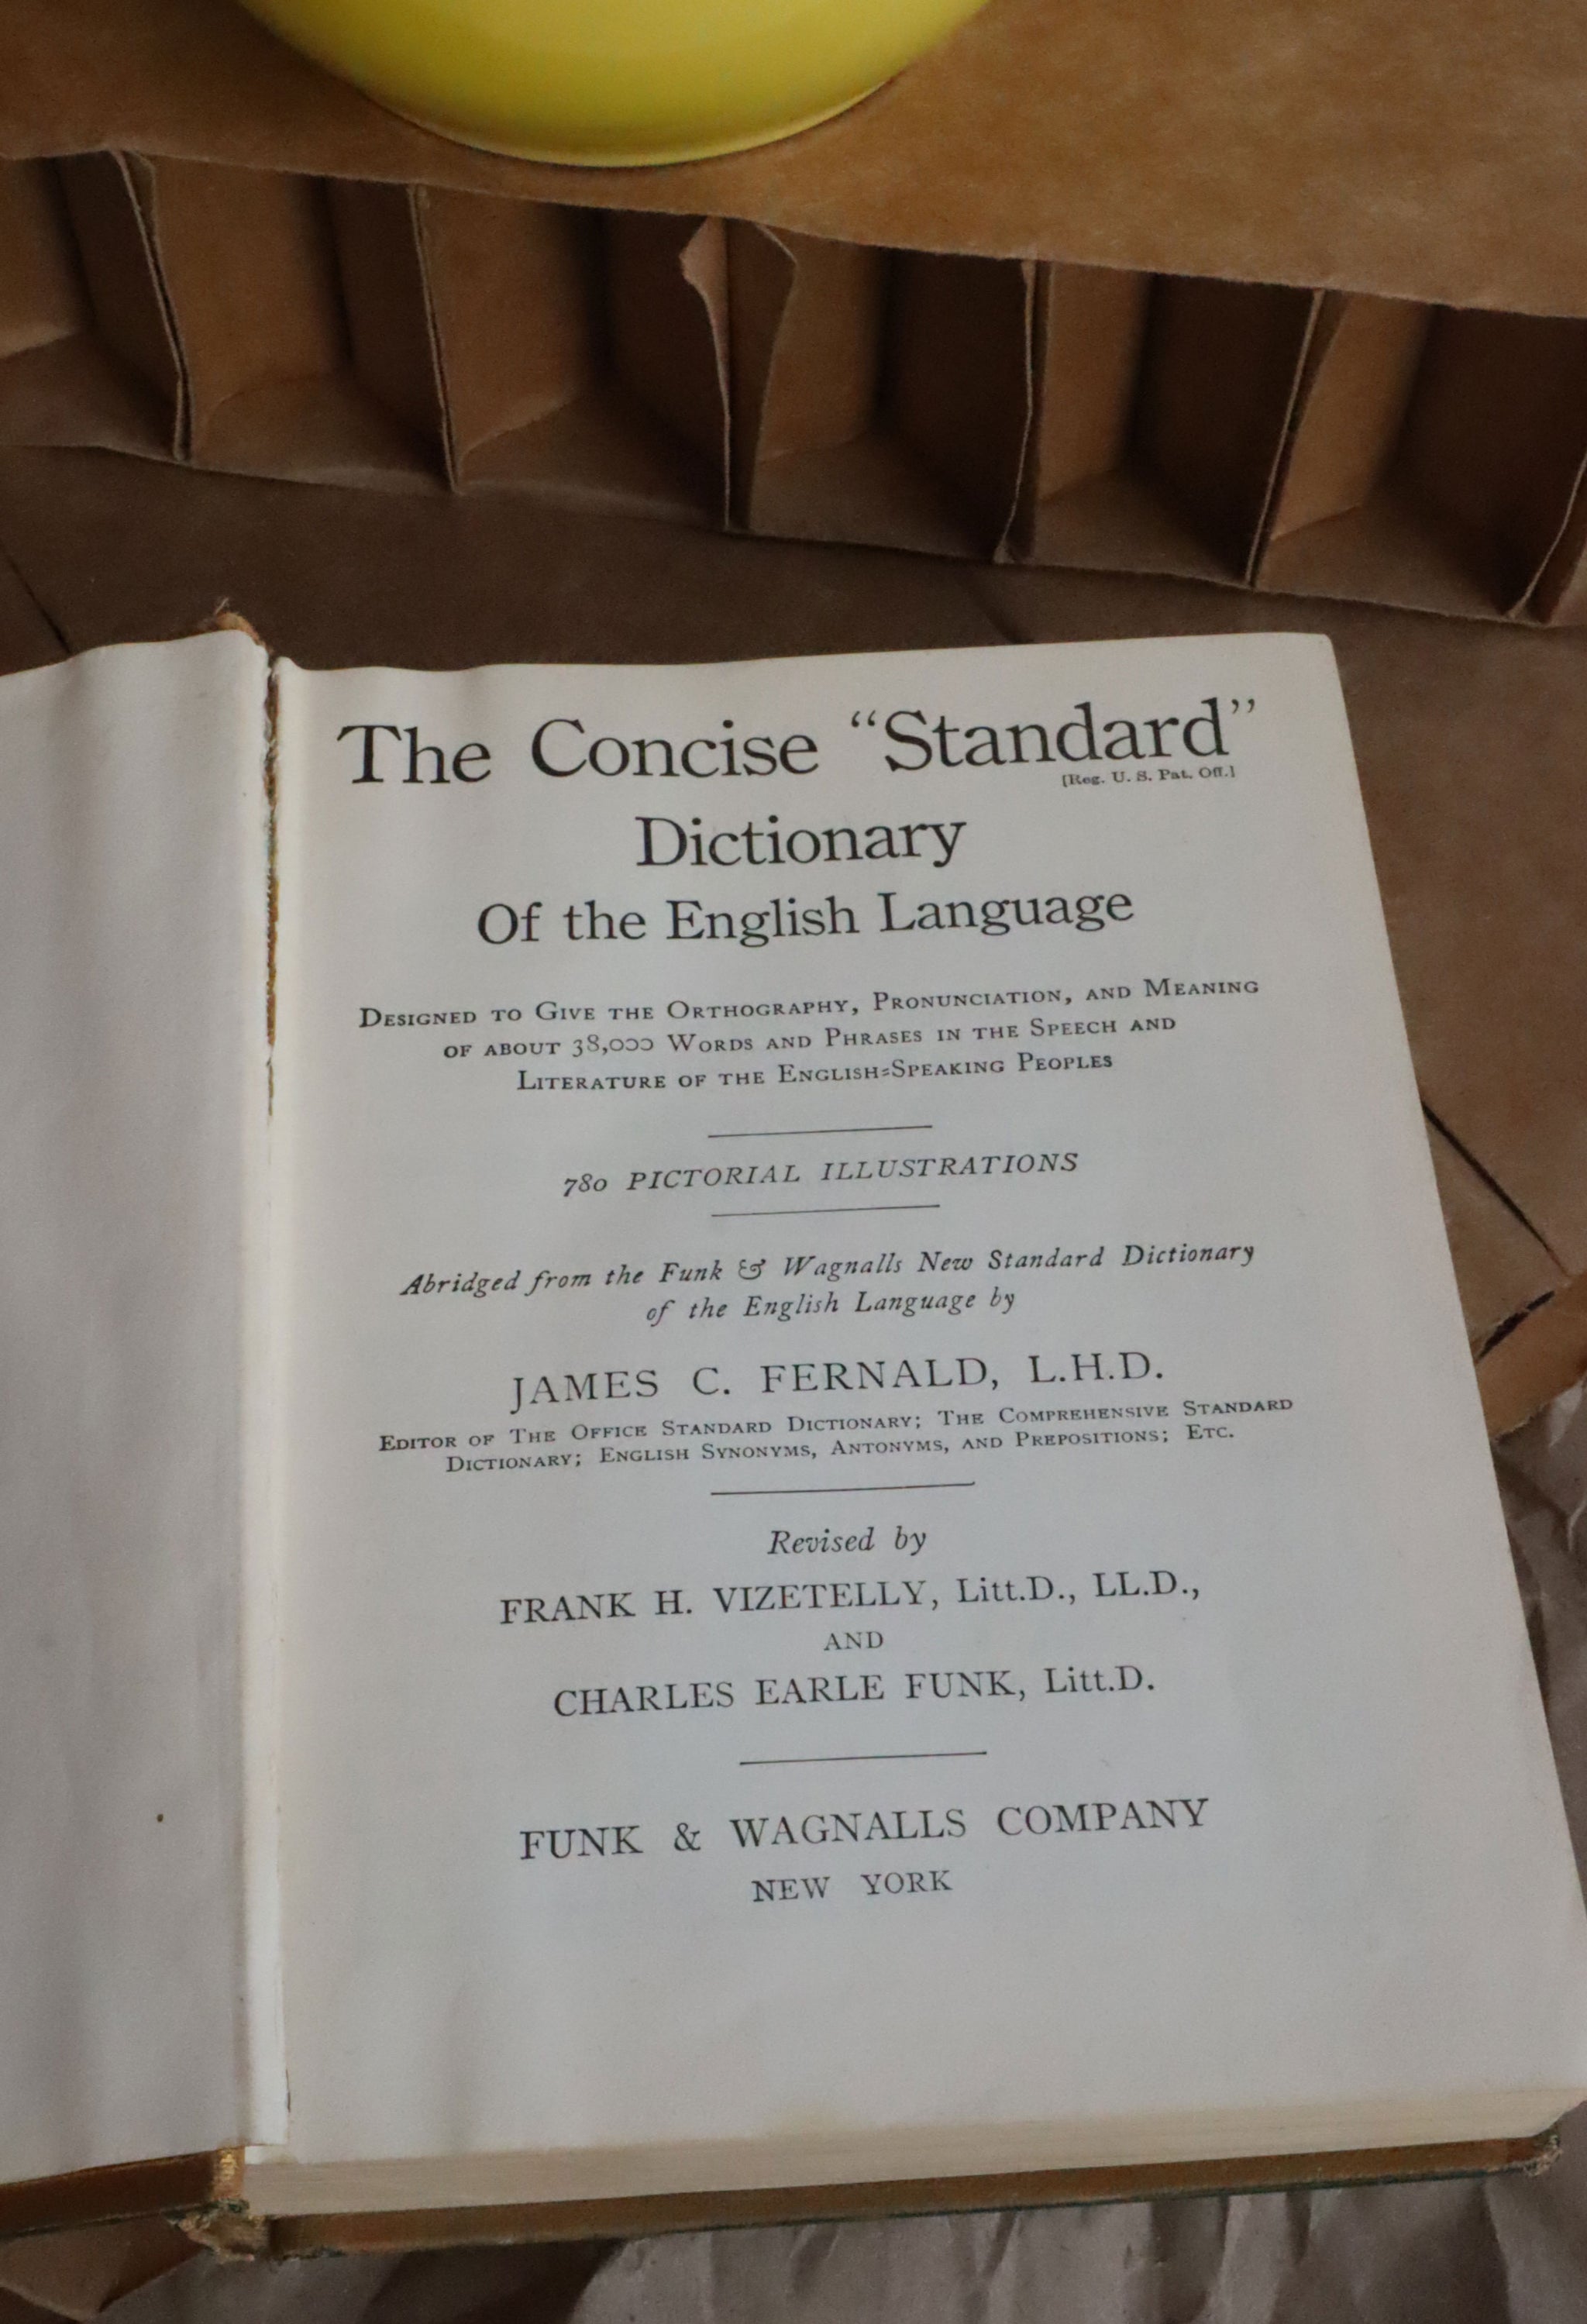 Vintage H.C. Book - The 'Concise" Standard Dictionary of the English Language